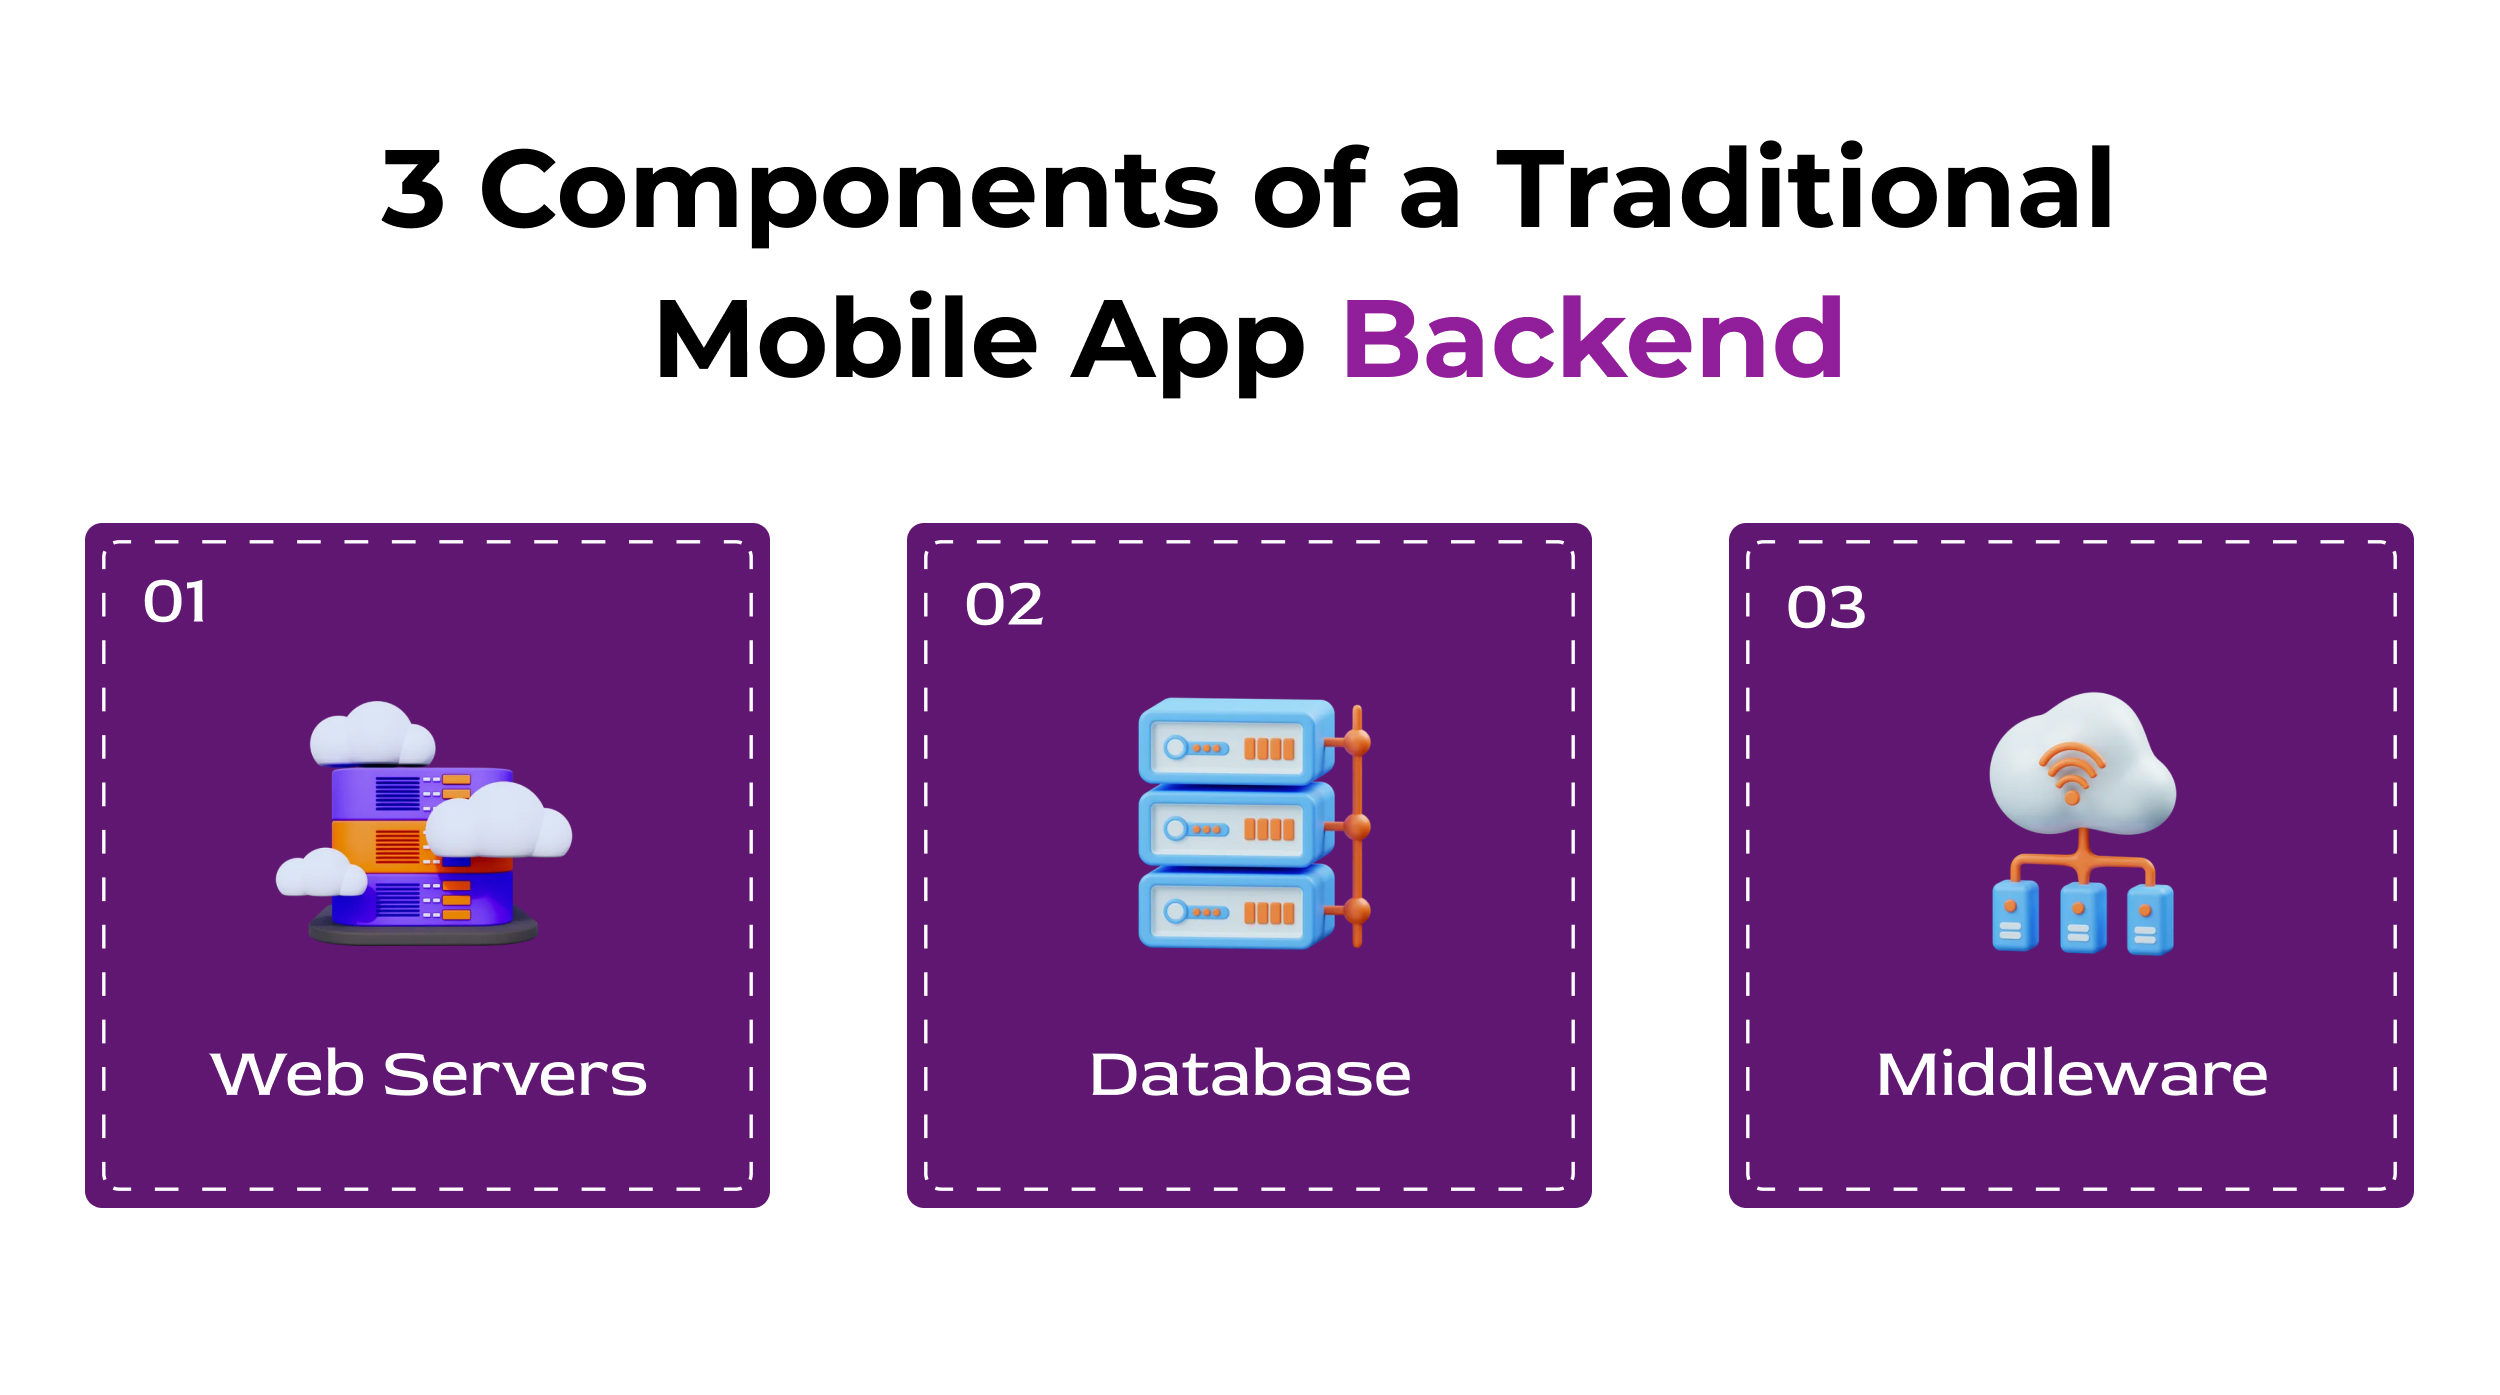 3 Components of a Traditional Mobile App Backend